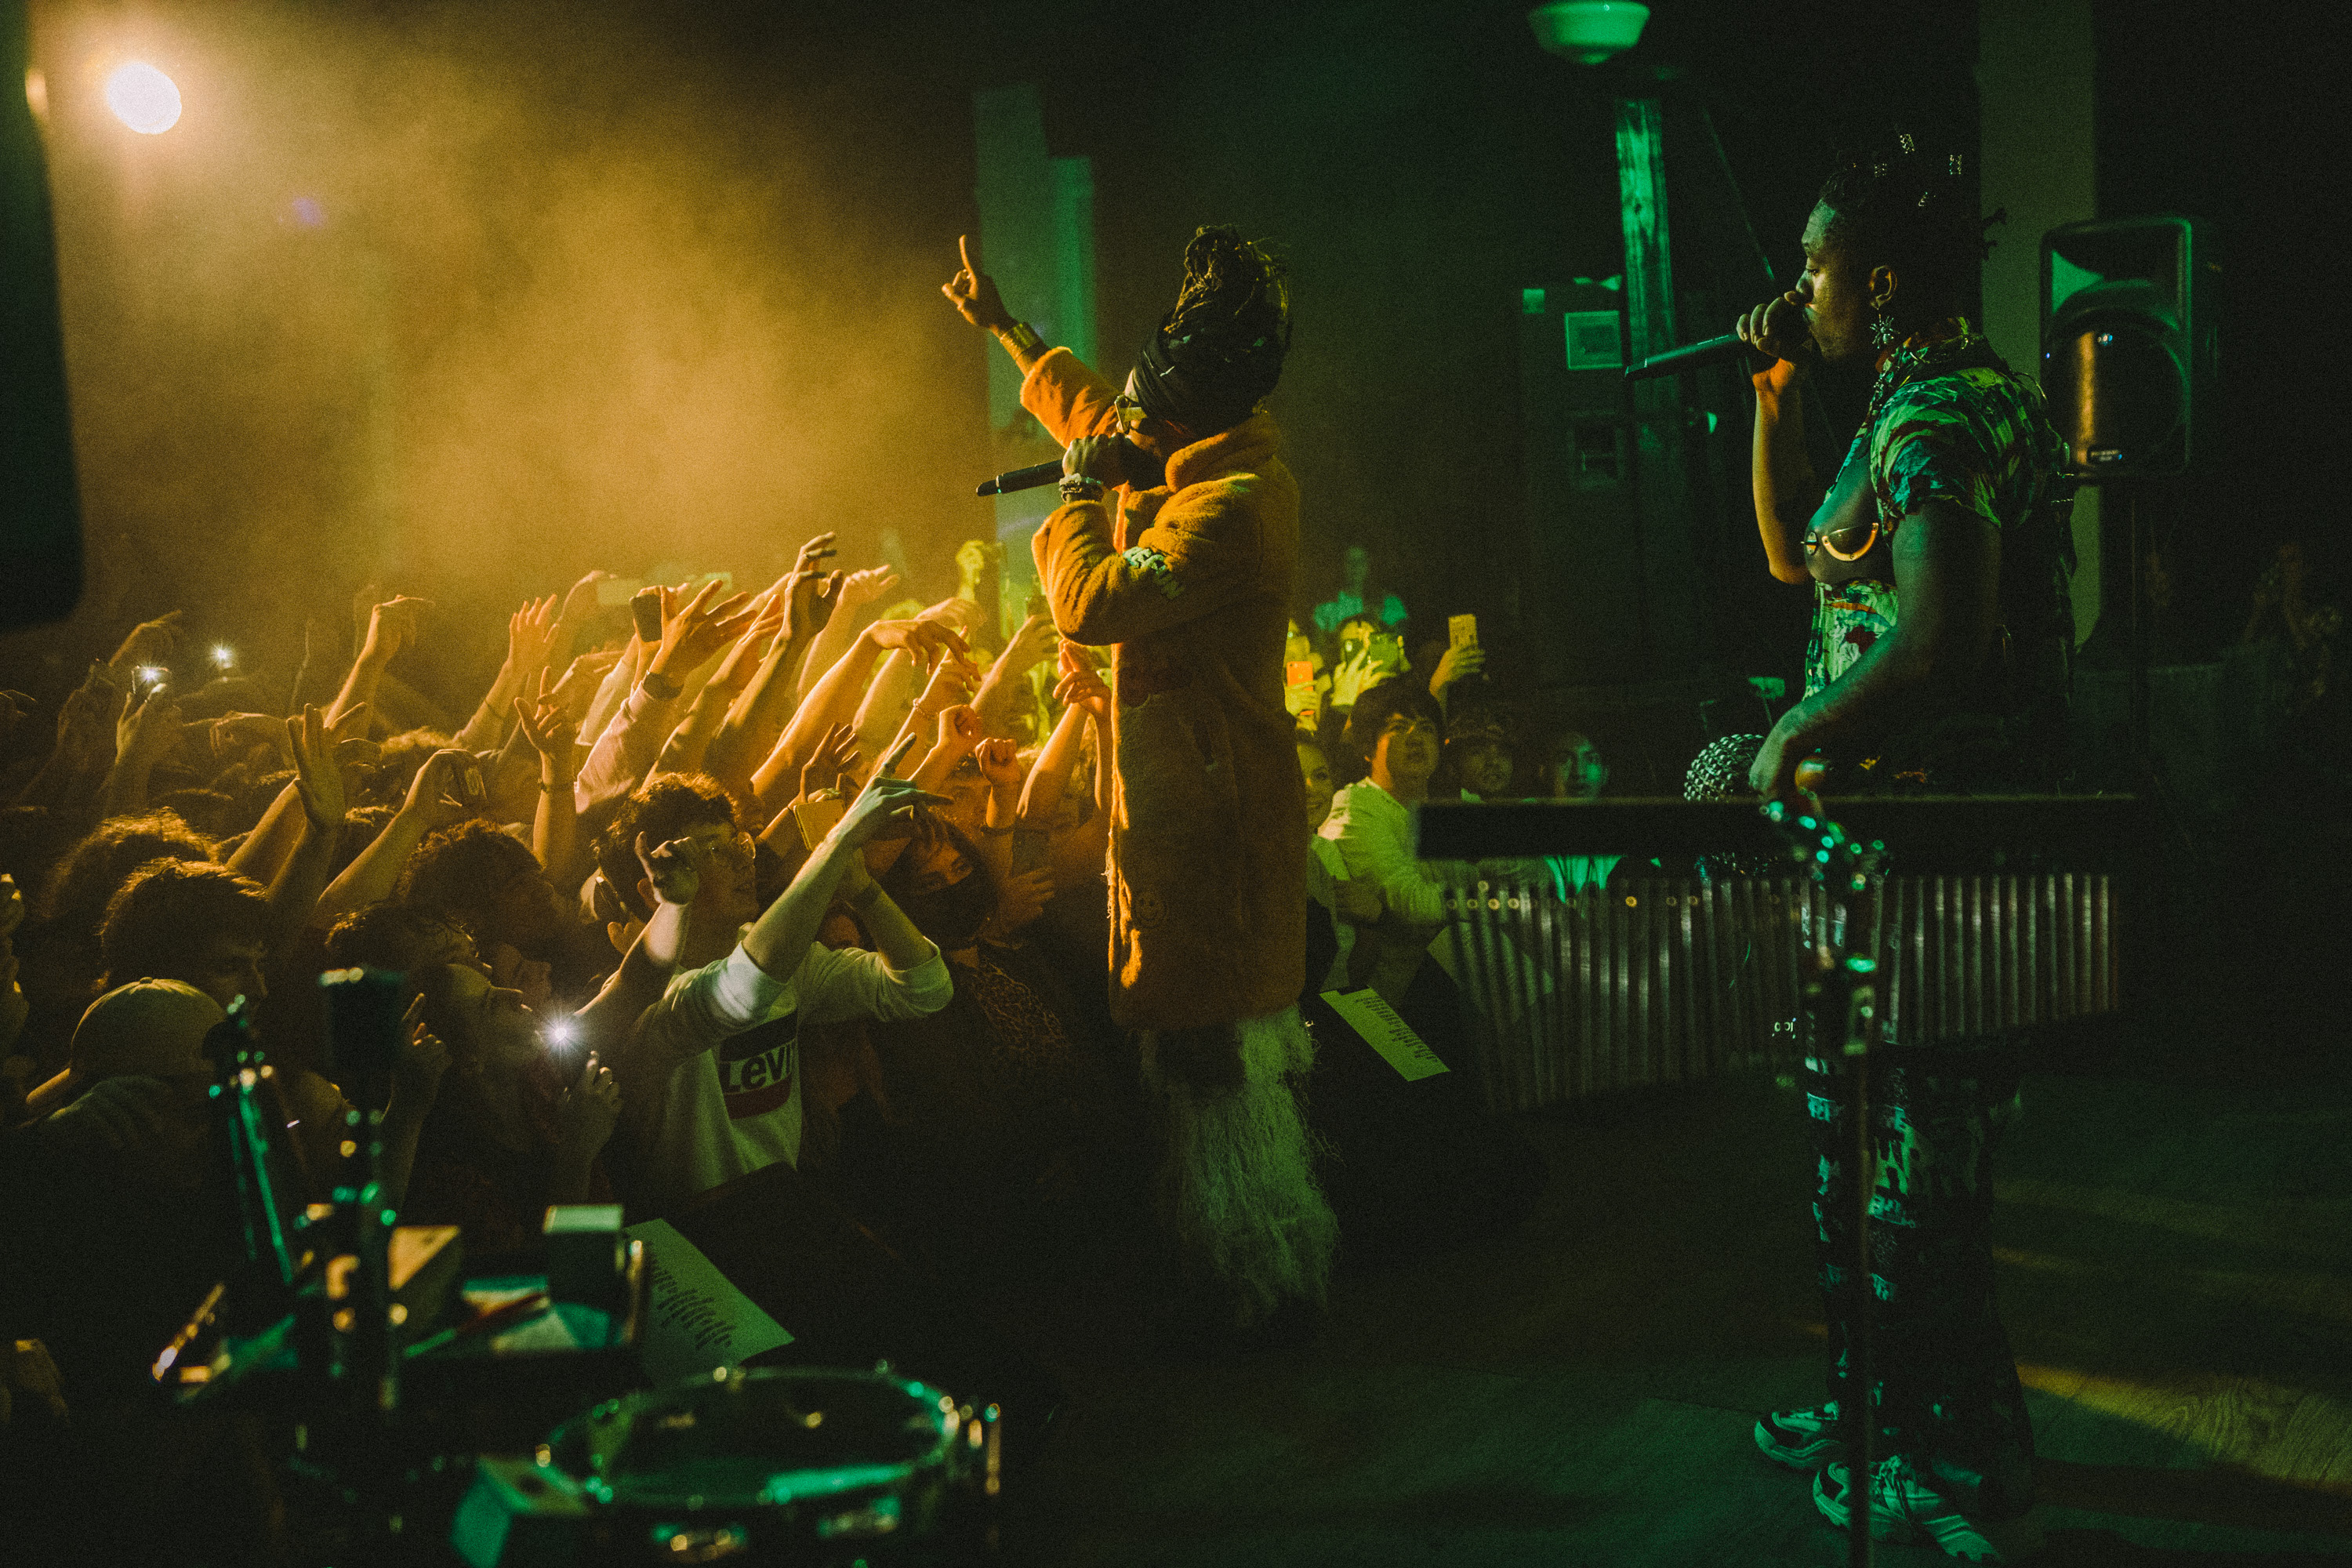 EarthGang Welcome To Mirrorland Tour with Guapdad 4000. Photos by Todd Cooper